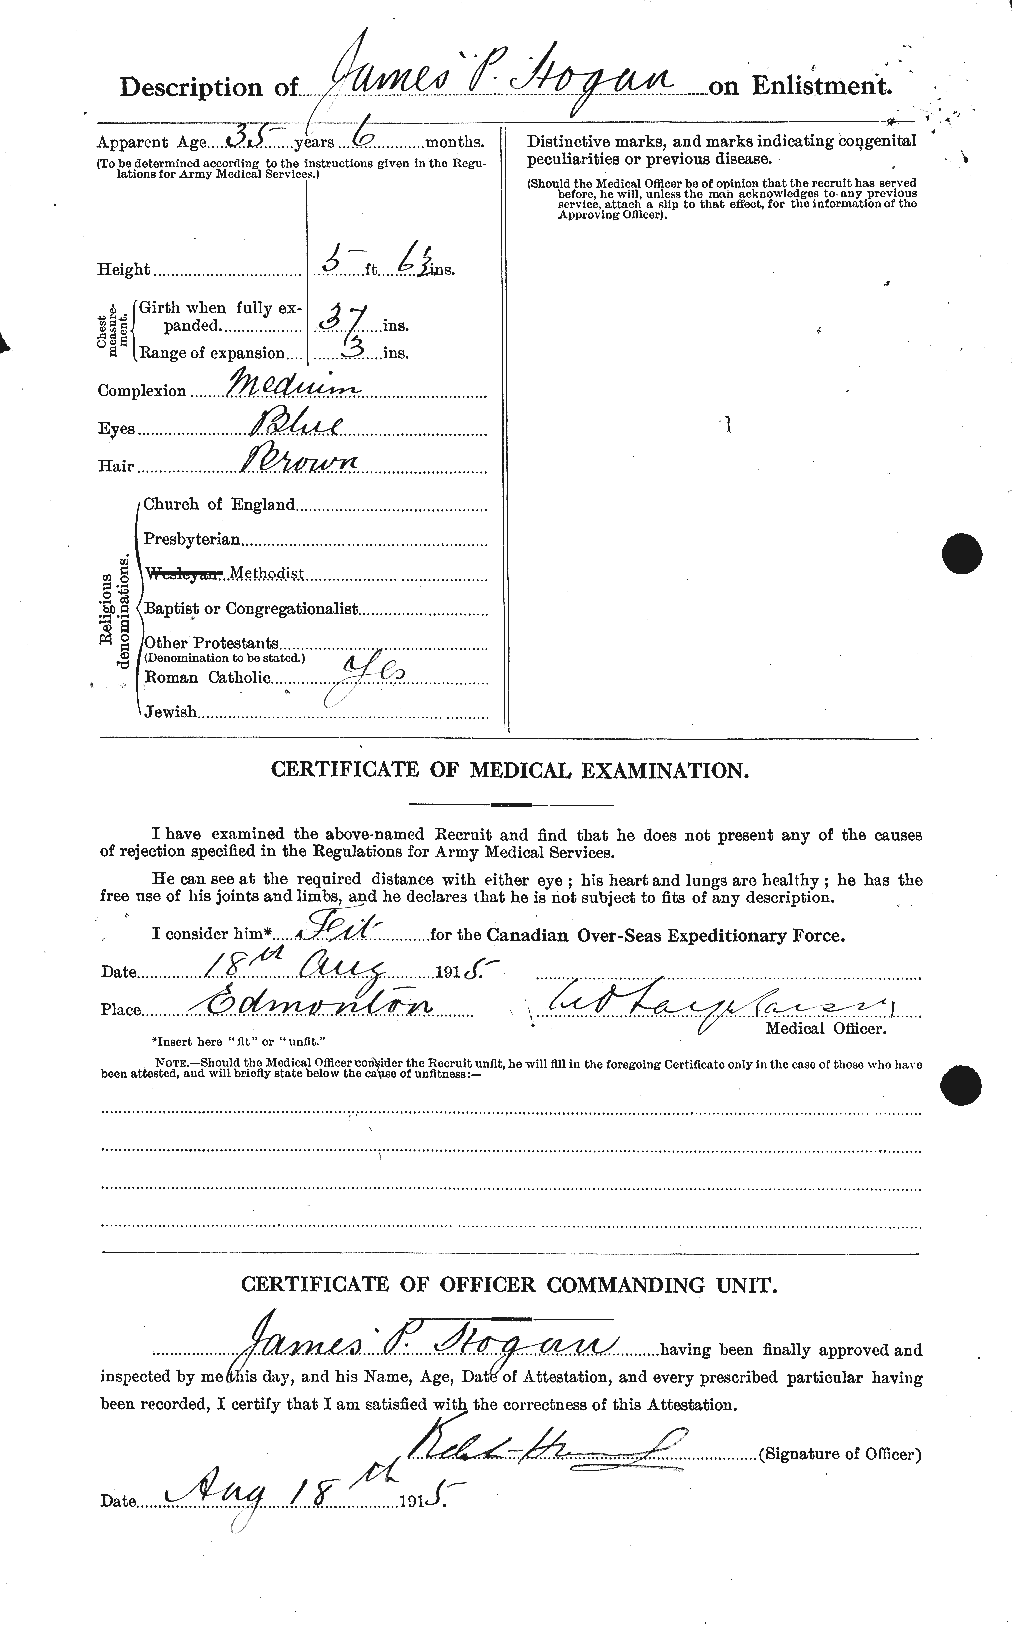 Personnel Records of the First World War - CEF 397068b